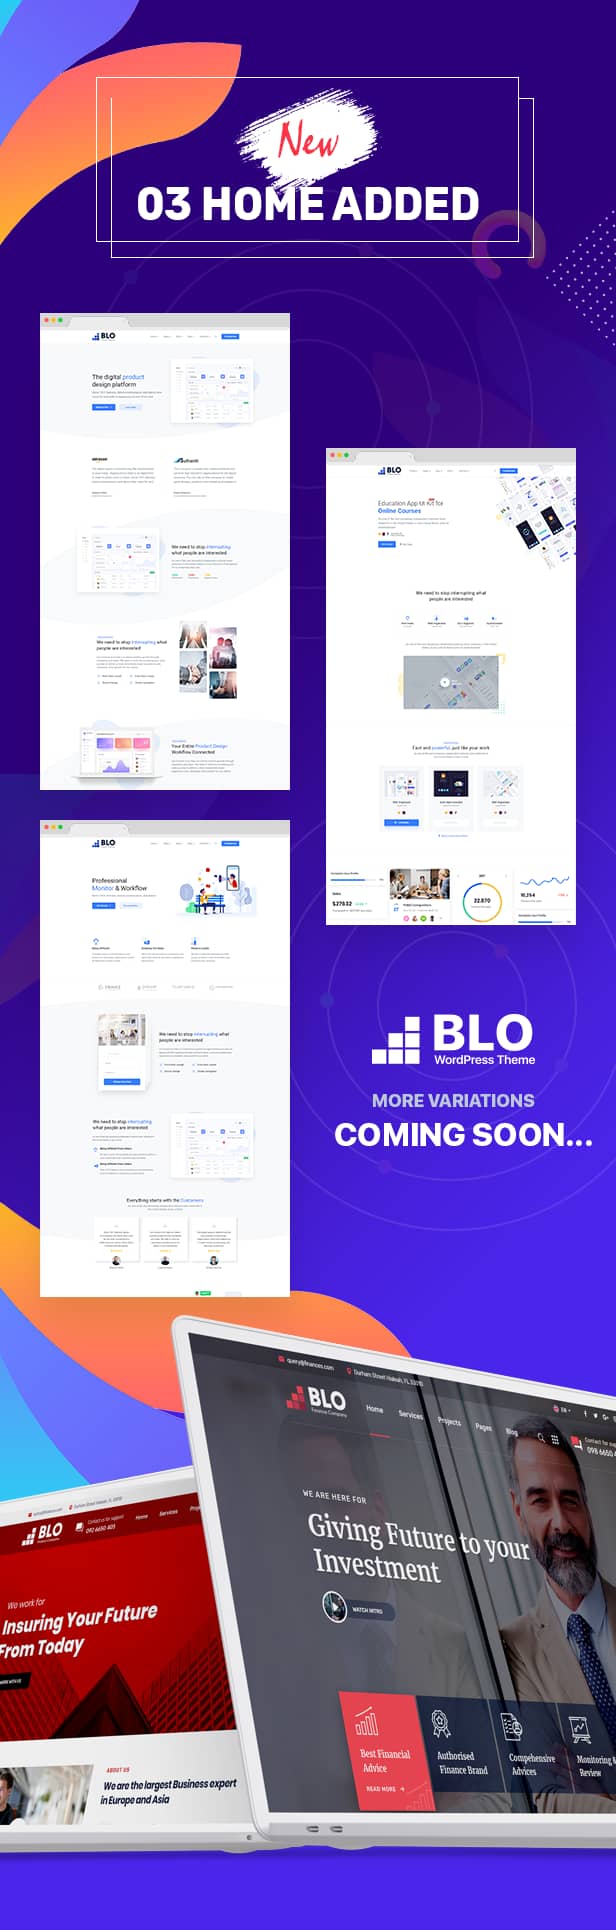 blo 3 home added